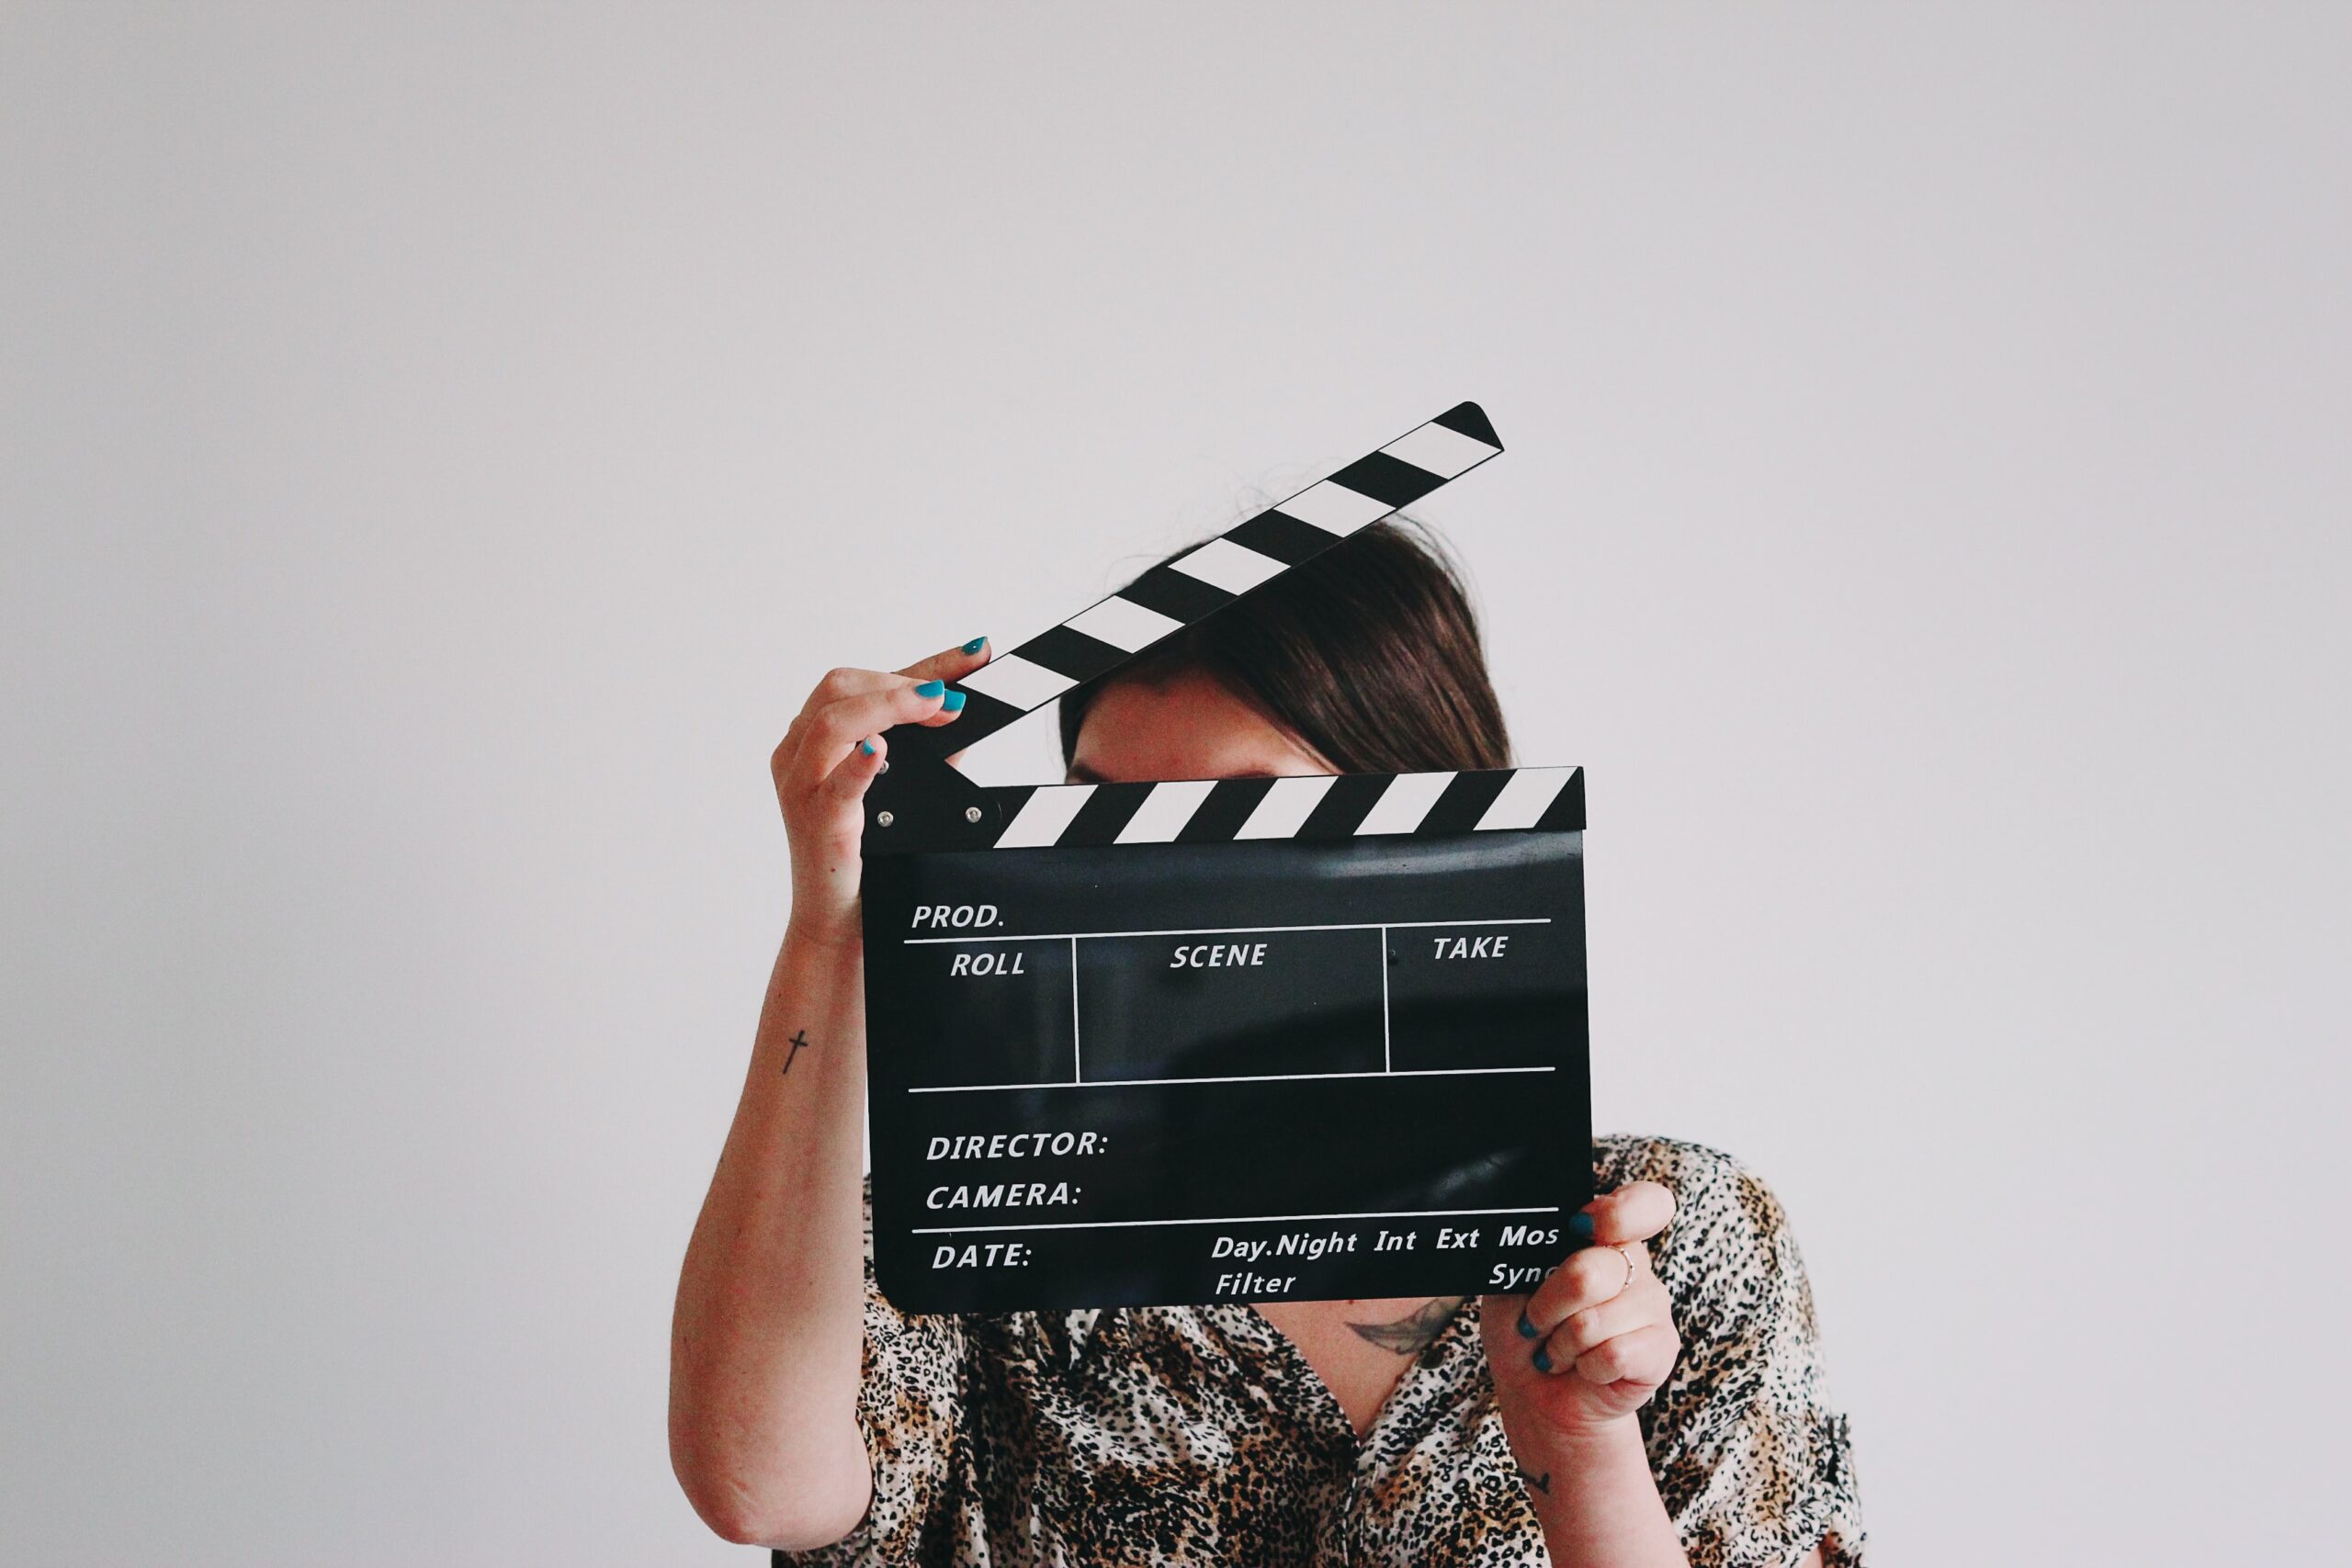 A woman holding a clapboard in front of her face